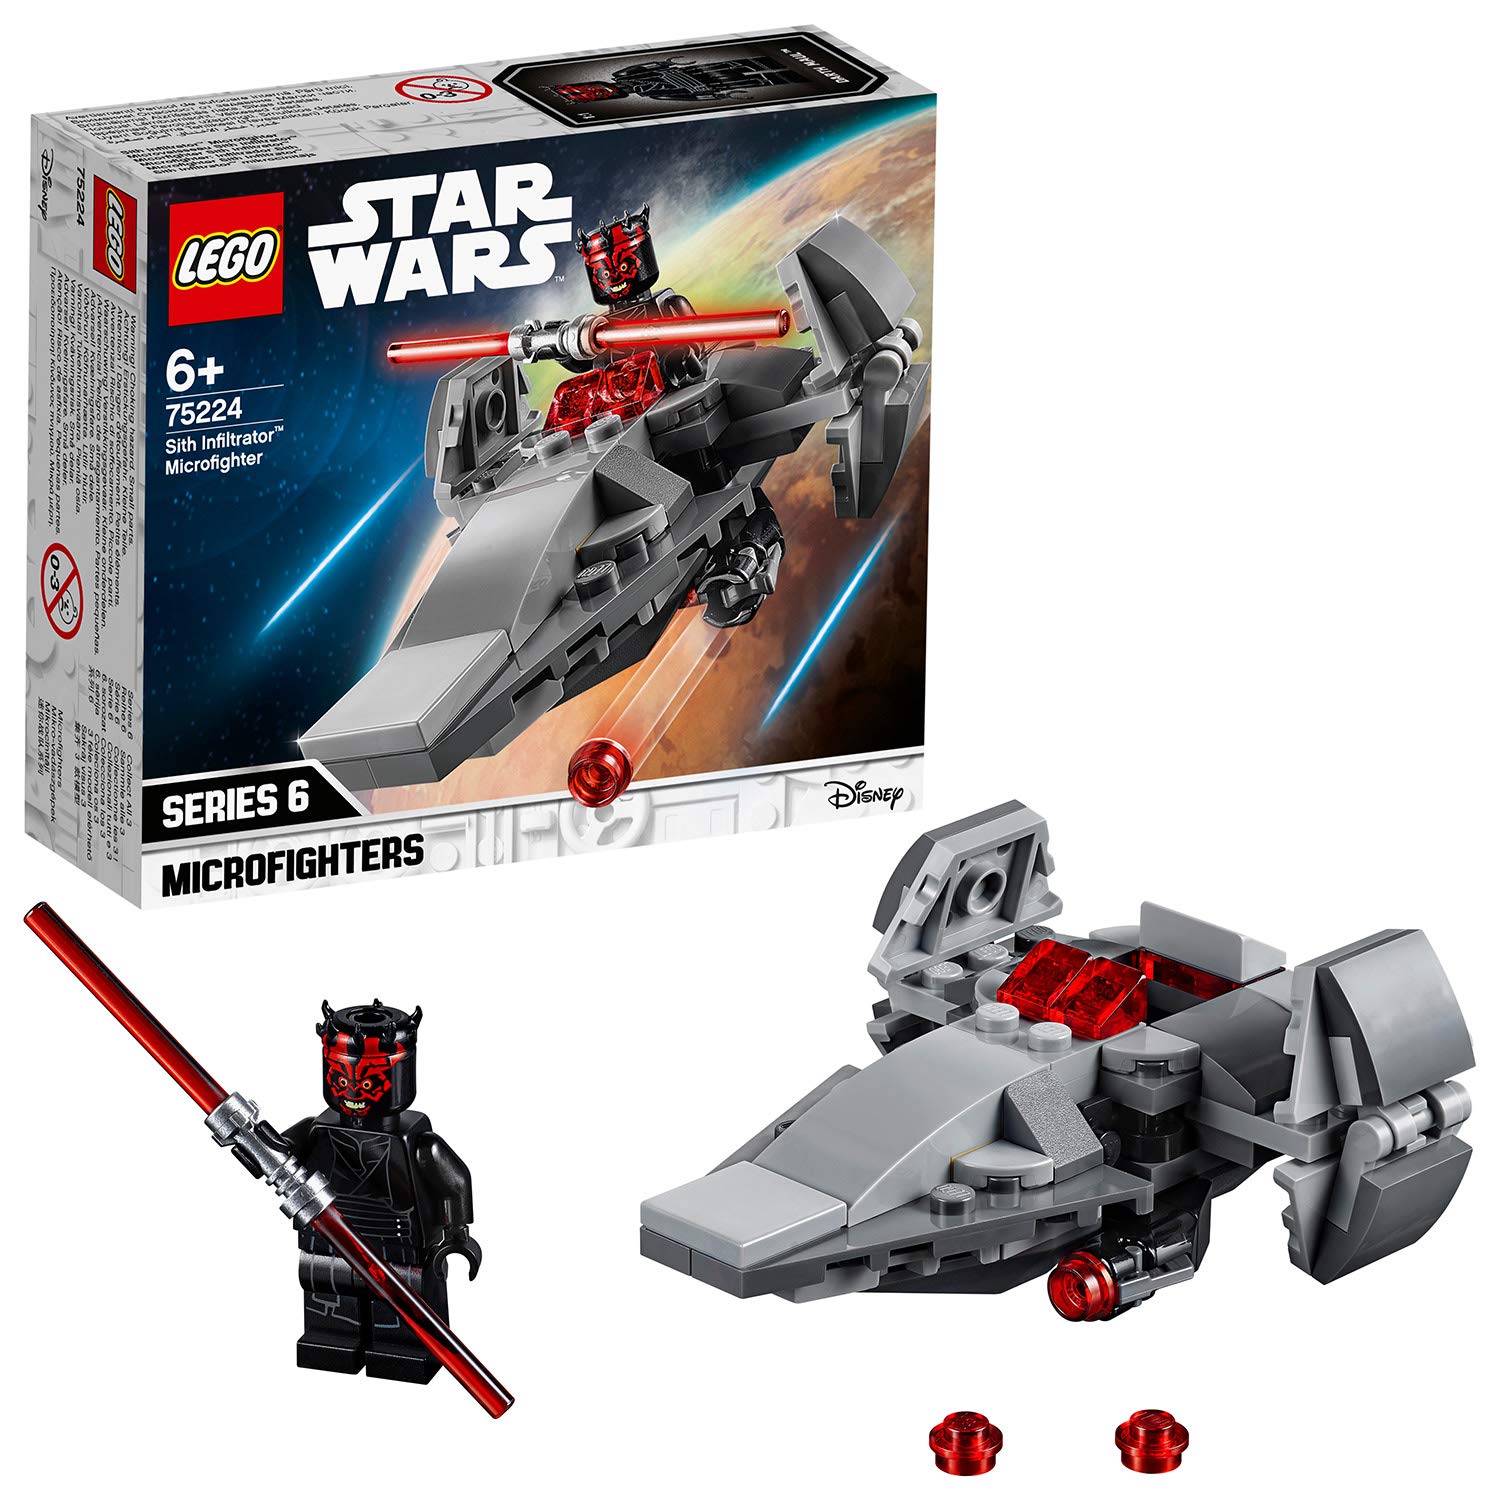 Lego Star Wars 75224 Sith Infiltrator Microfighter